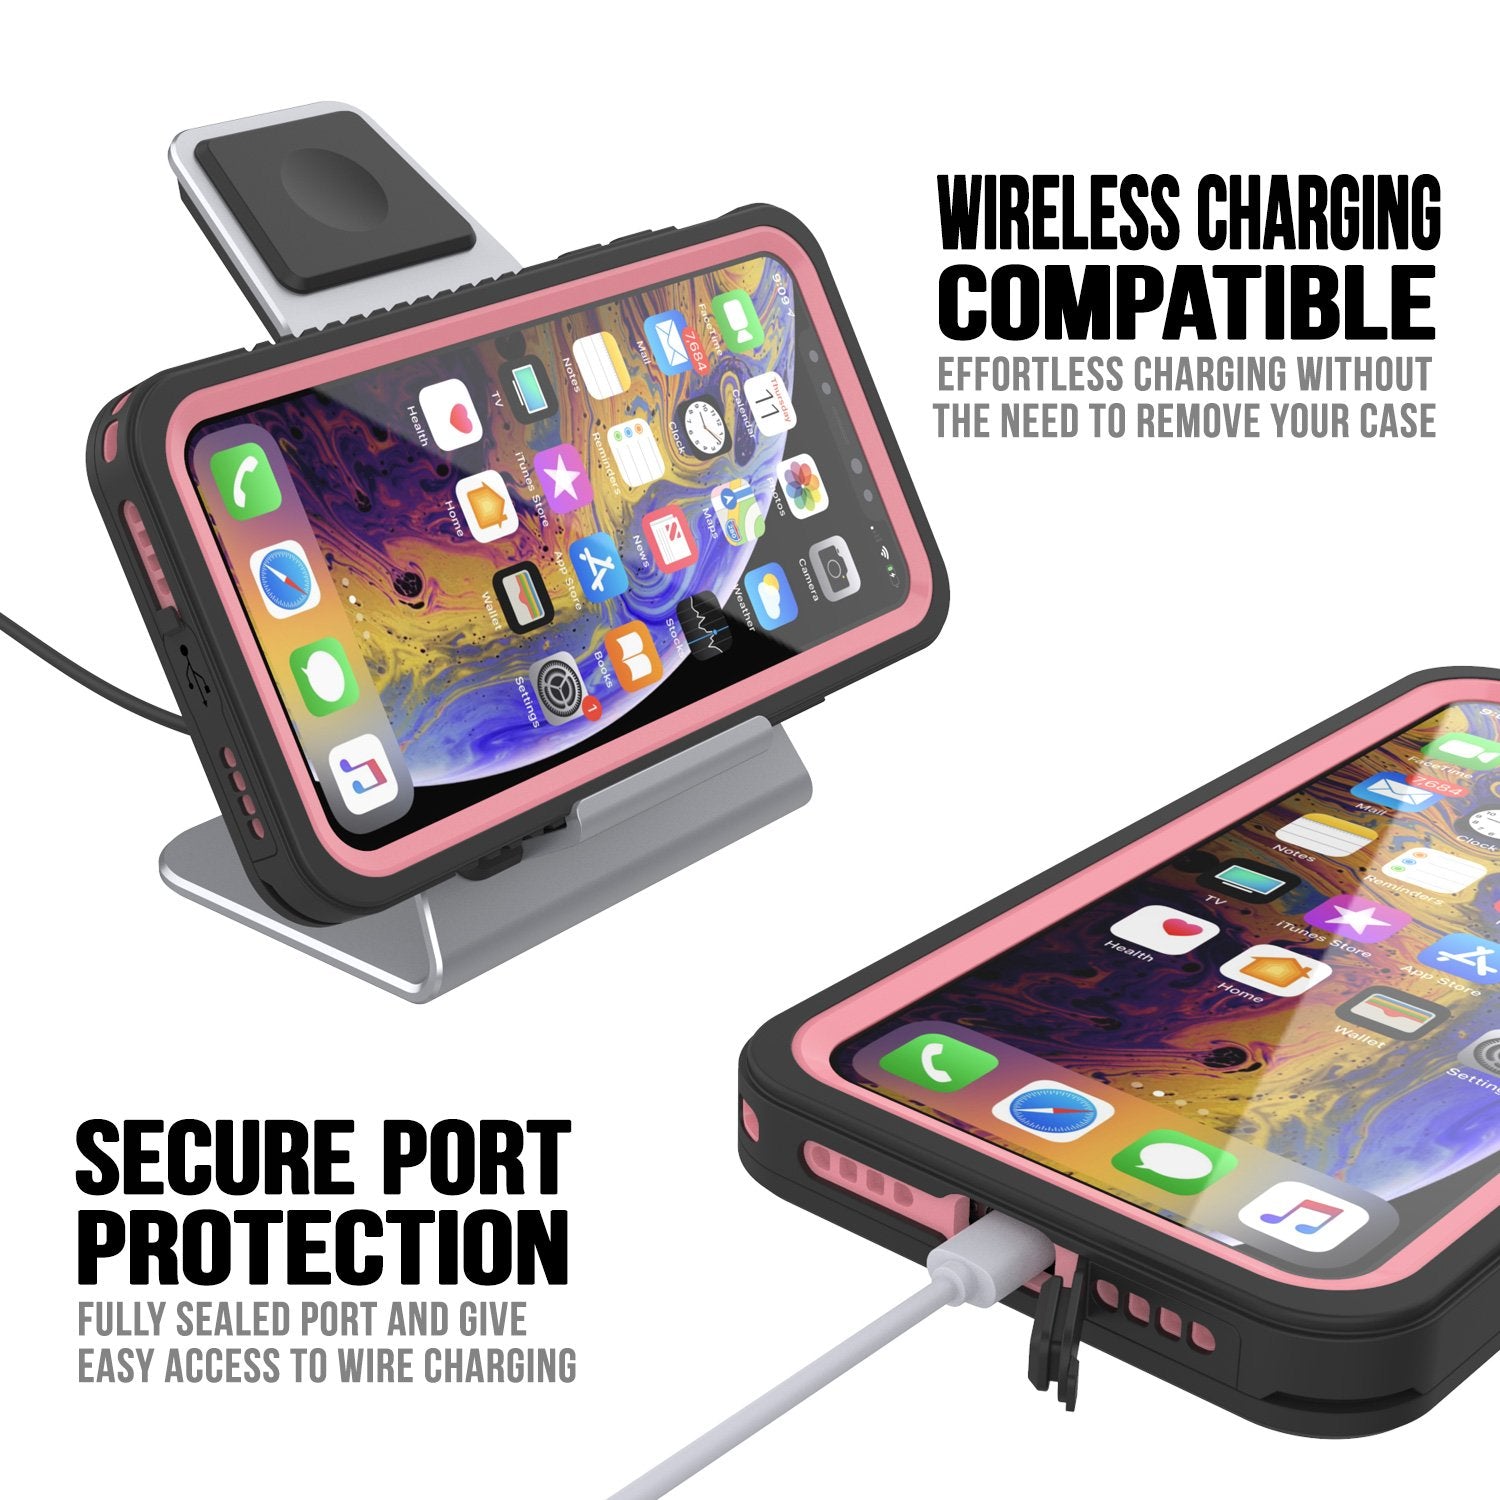 iPhone 11 Pro Max Waterproof Case, Punkcase [Extreme Series] Armor Cover W/ Built In Screen Protector [Pink]